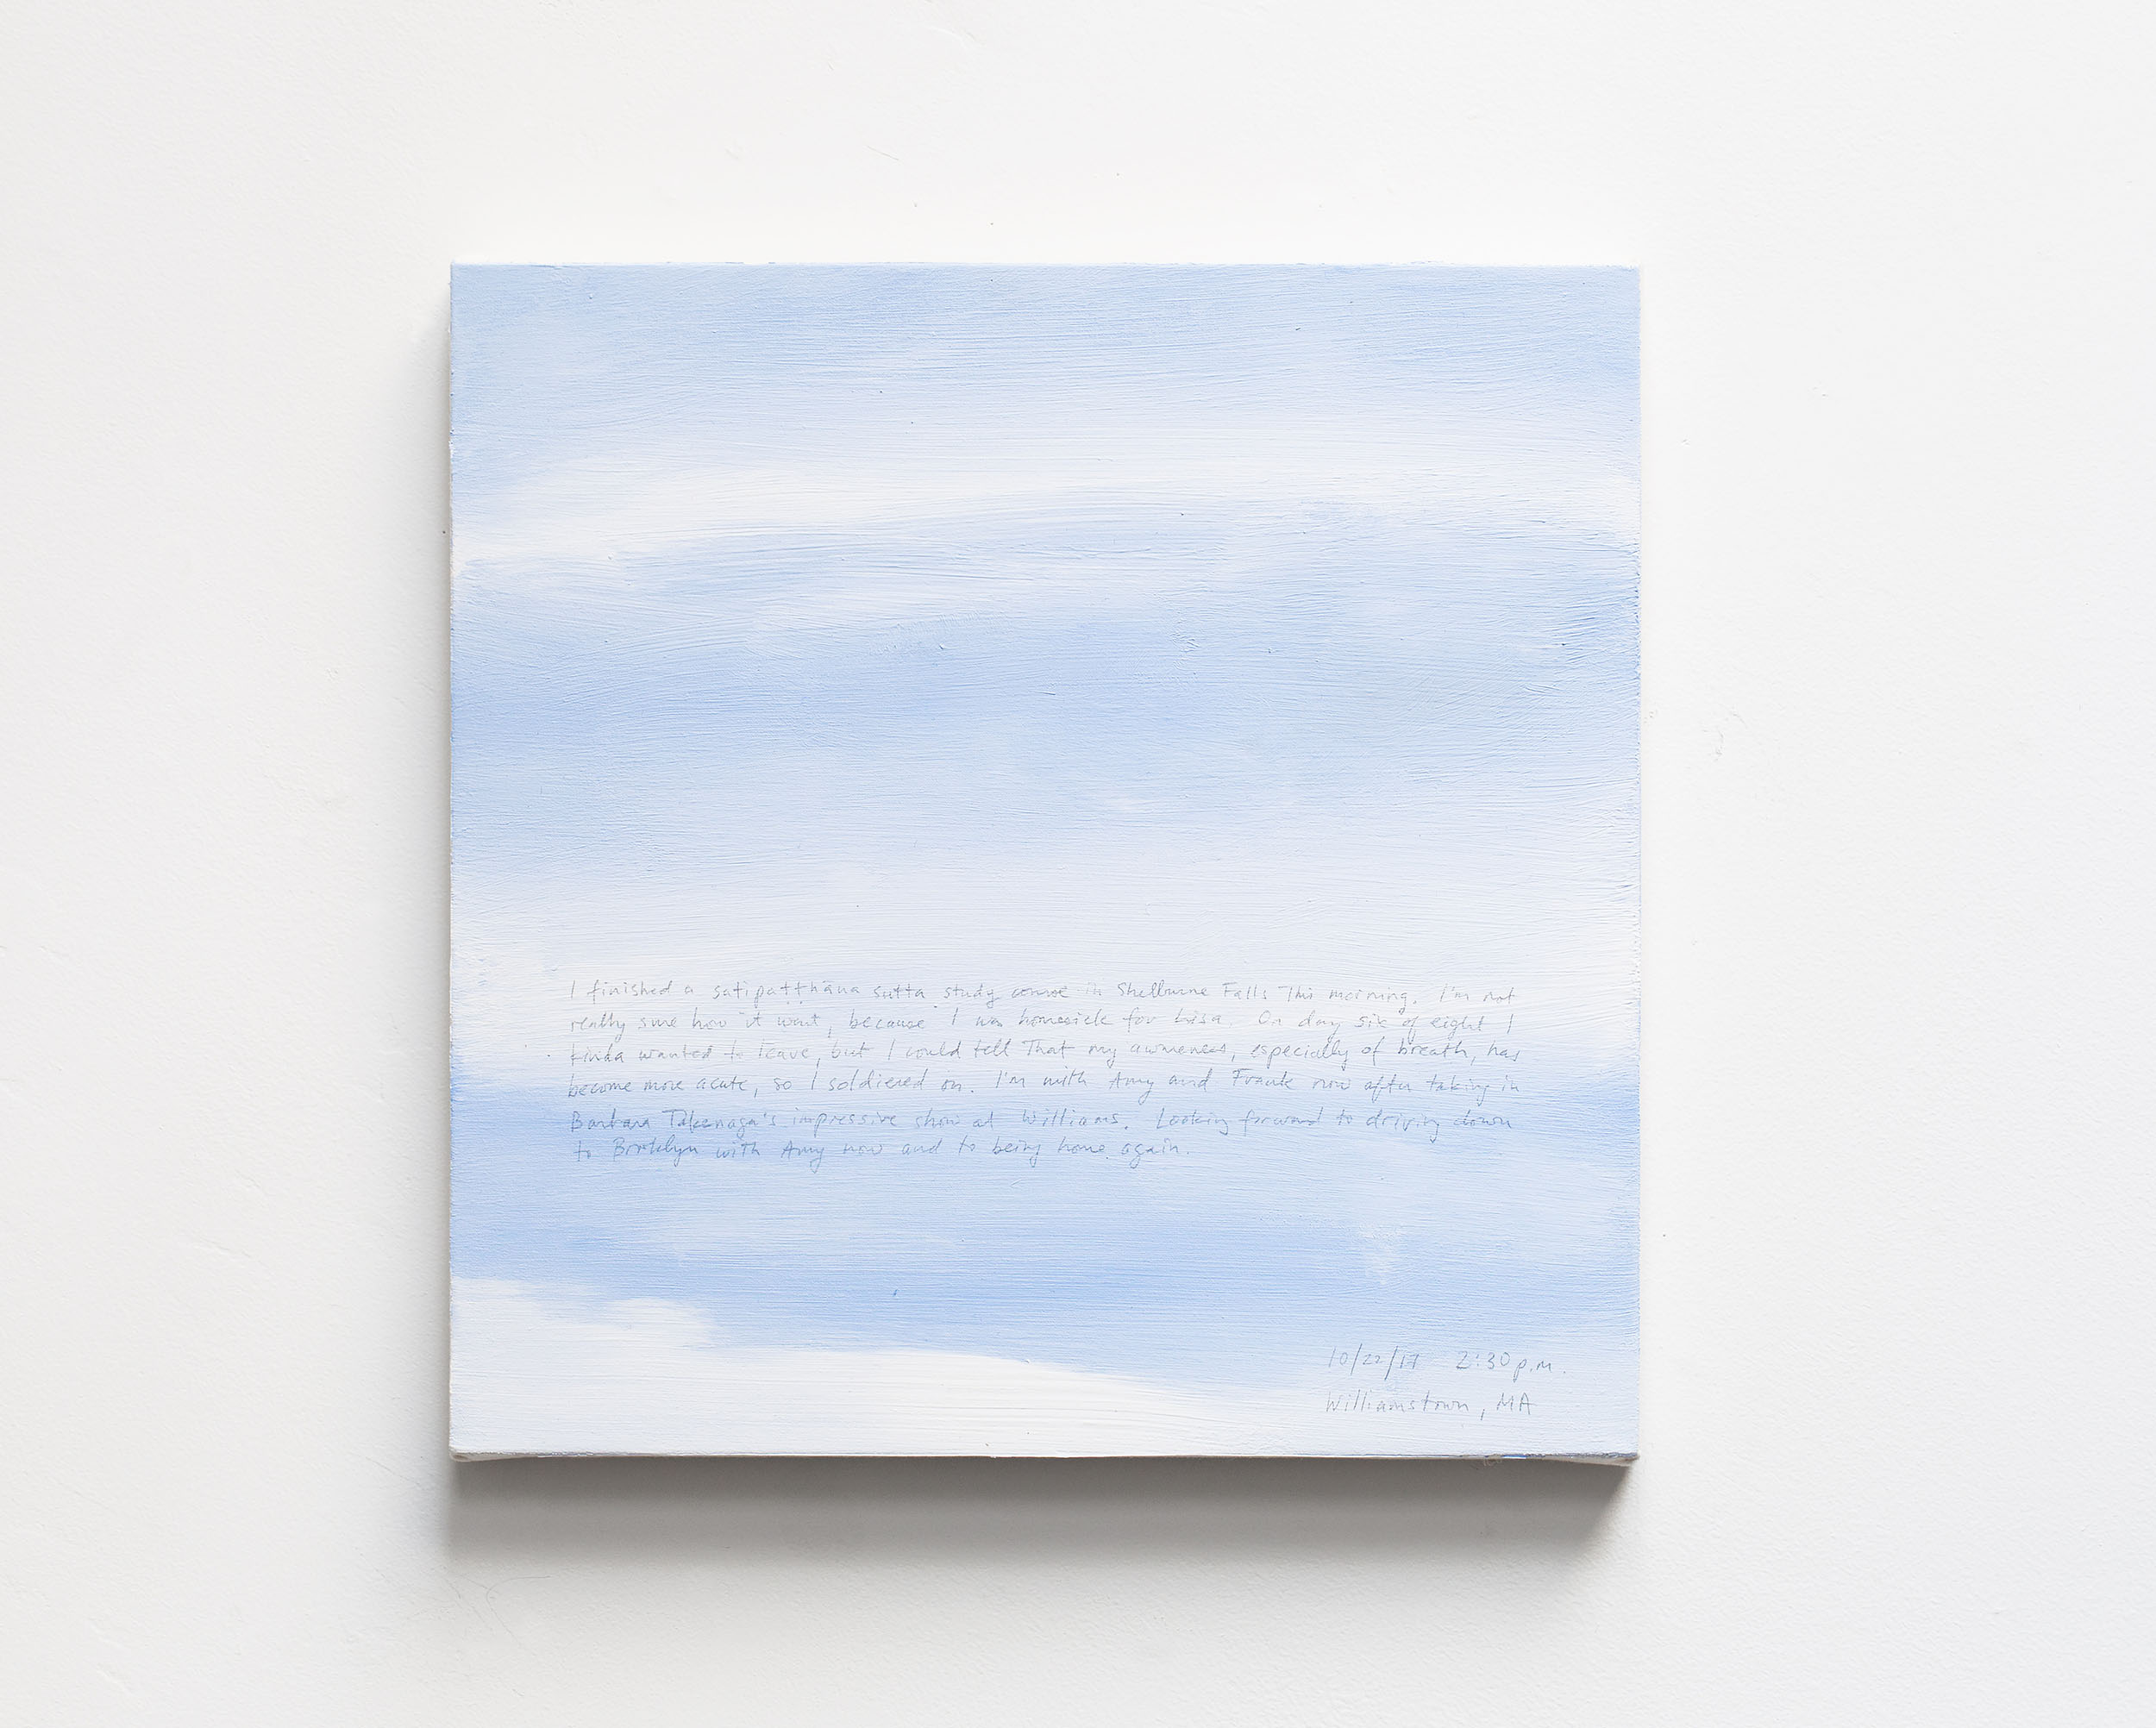 A 14 × 14 inch, acrylic painting of the sky. A journal entry is handwritten on the painting:

“I finished a satipatthana sutta study course in Shelburne Falls this morning. I’m not really sure how it went, because I was homesick for Lisa. On day six of eight I kinda wanted to leave, but I could tell that my awareness, especially of breath, has become more acute, so I soldiered on. I’m with Amy and Frank now after taking in Barbara Takenaga’s impressive show at Williams. Looking forward to driving down to Brooklyn with Amy now and to being home again.

10/22/17 2:30 p.m.
Williamstown, MA”